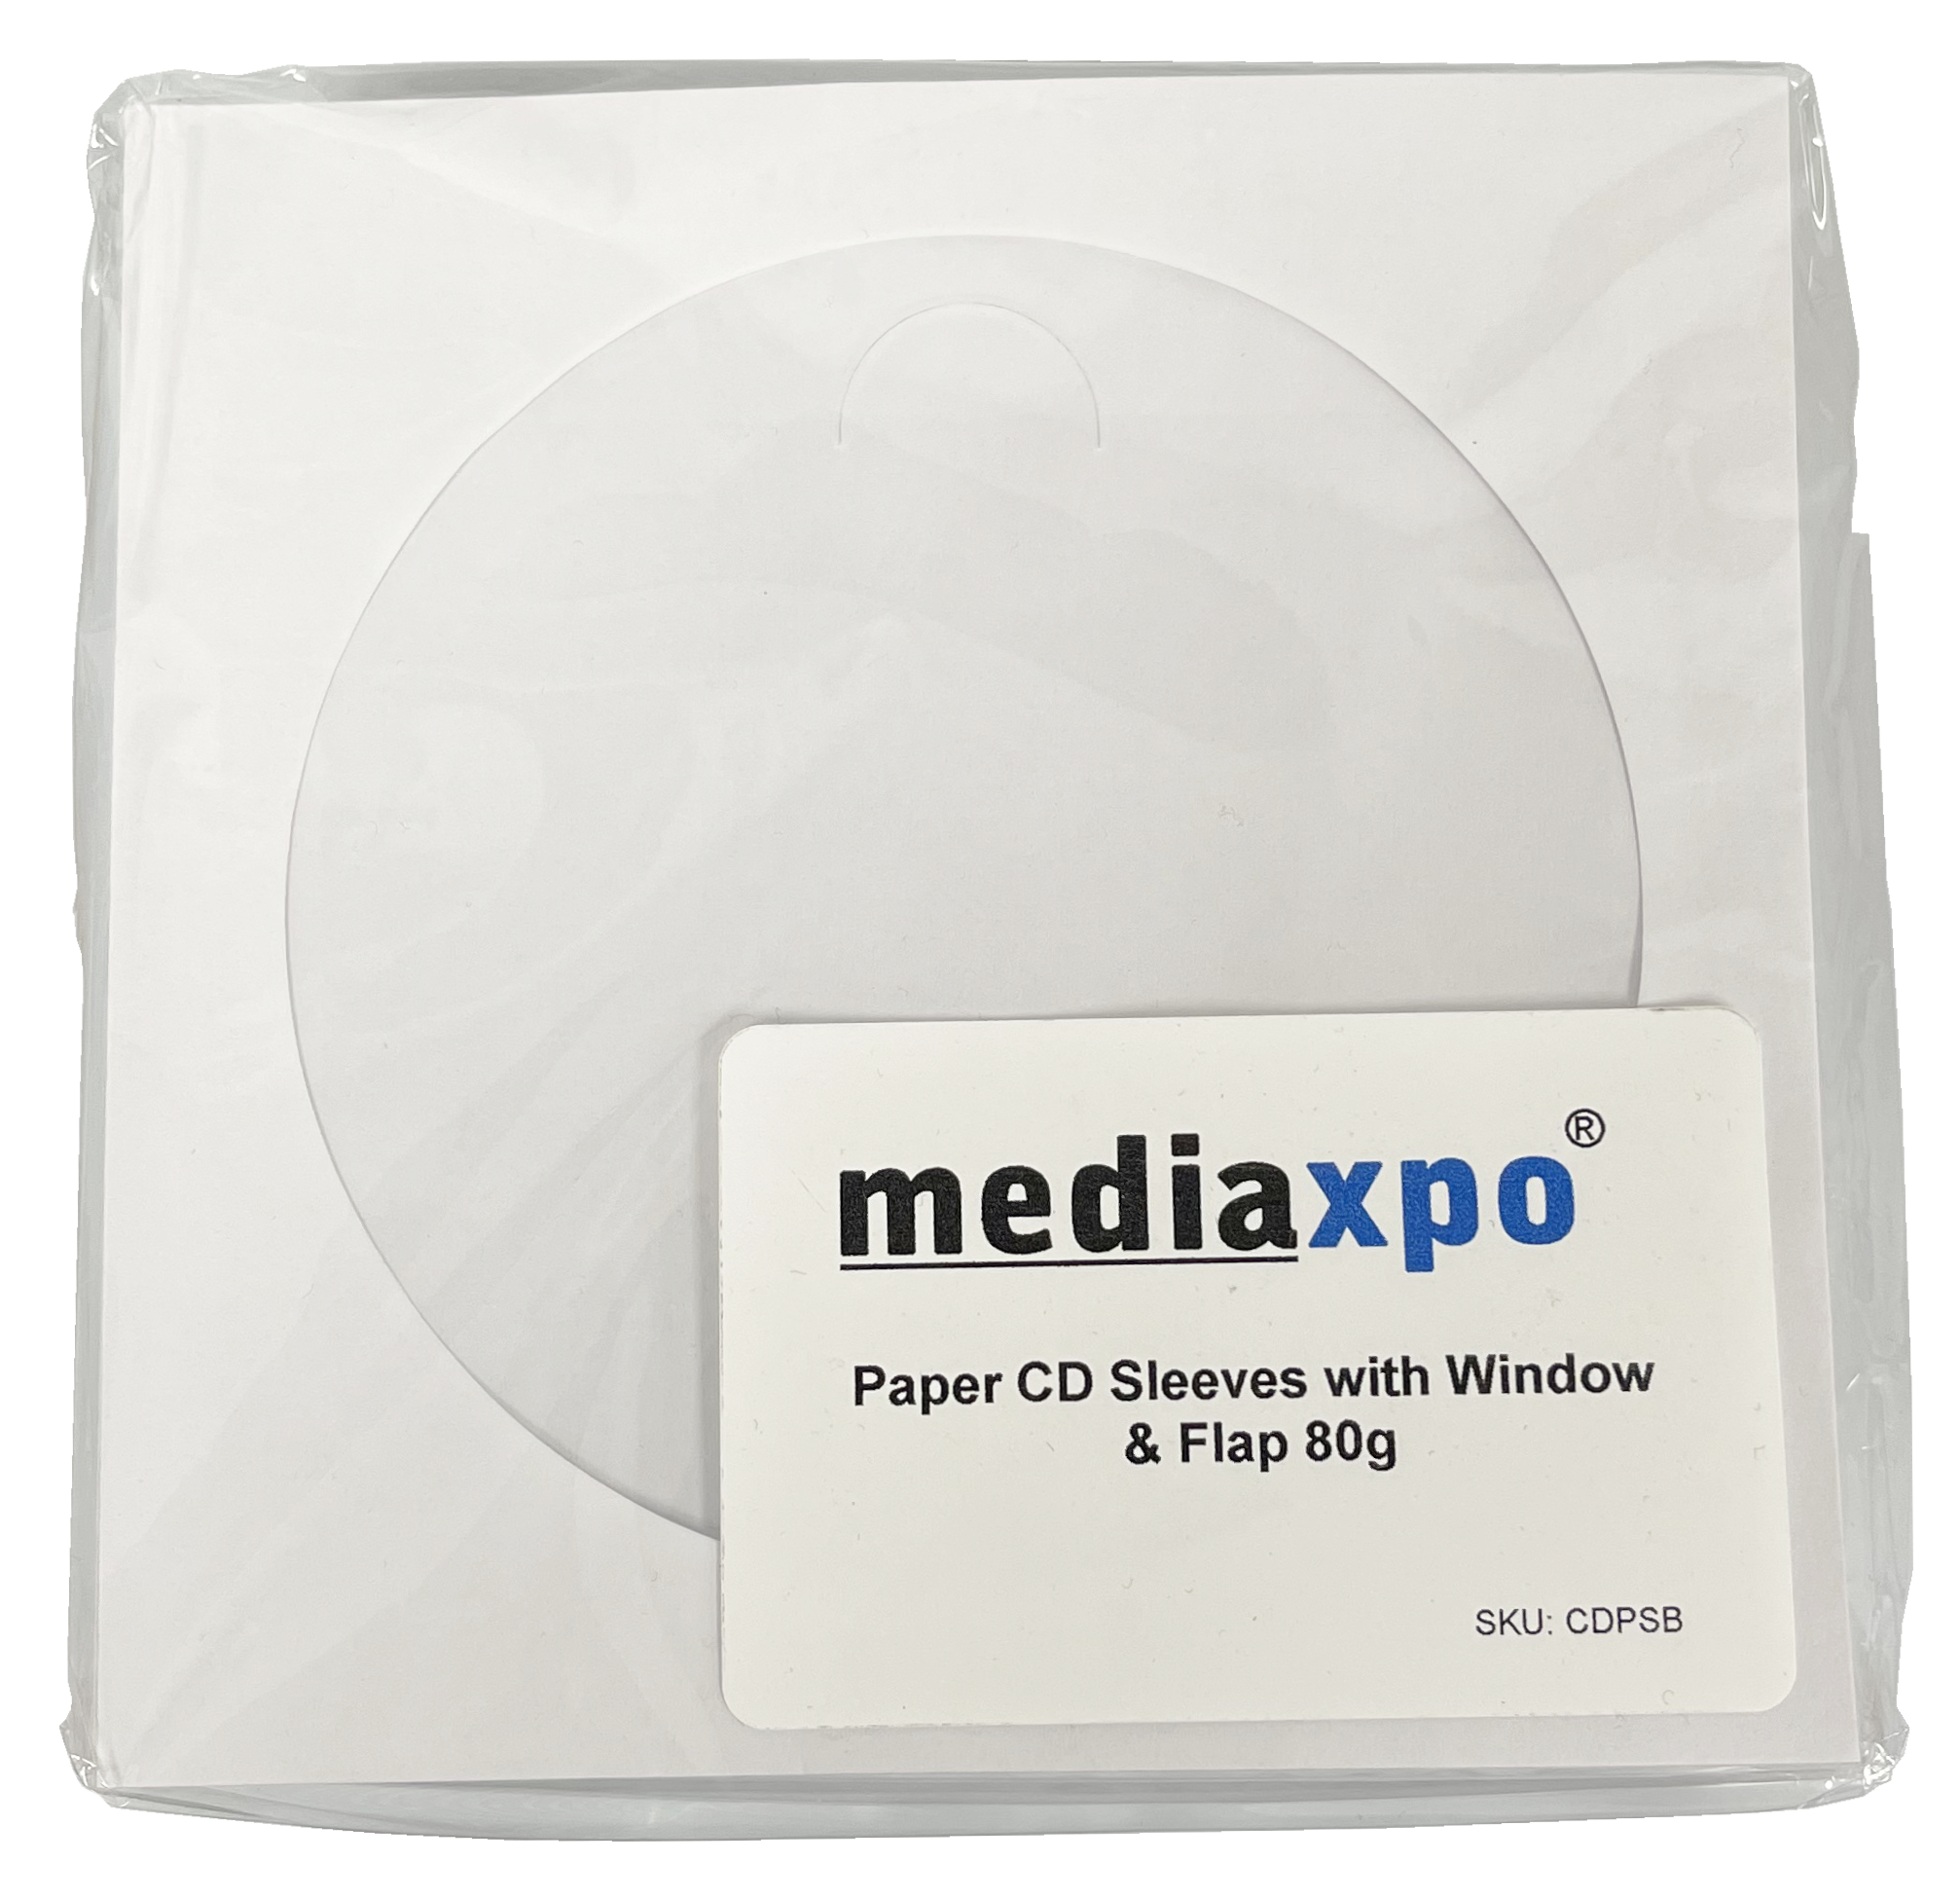 200 Paper CD Sleeves with Window & Flap 80g